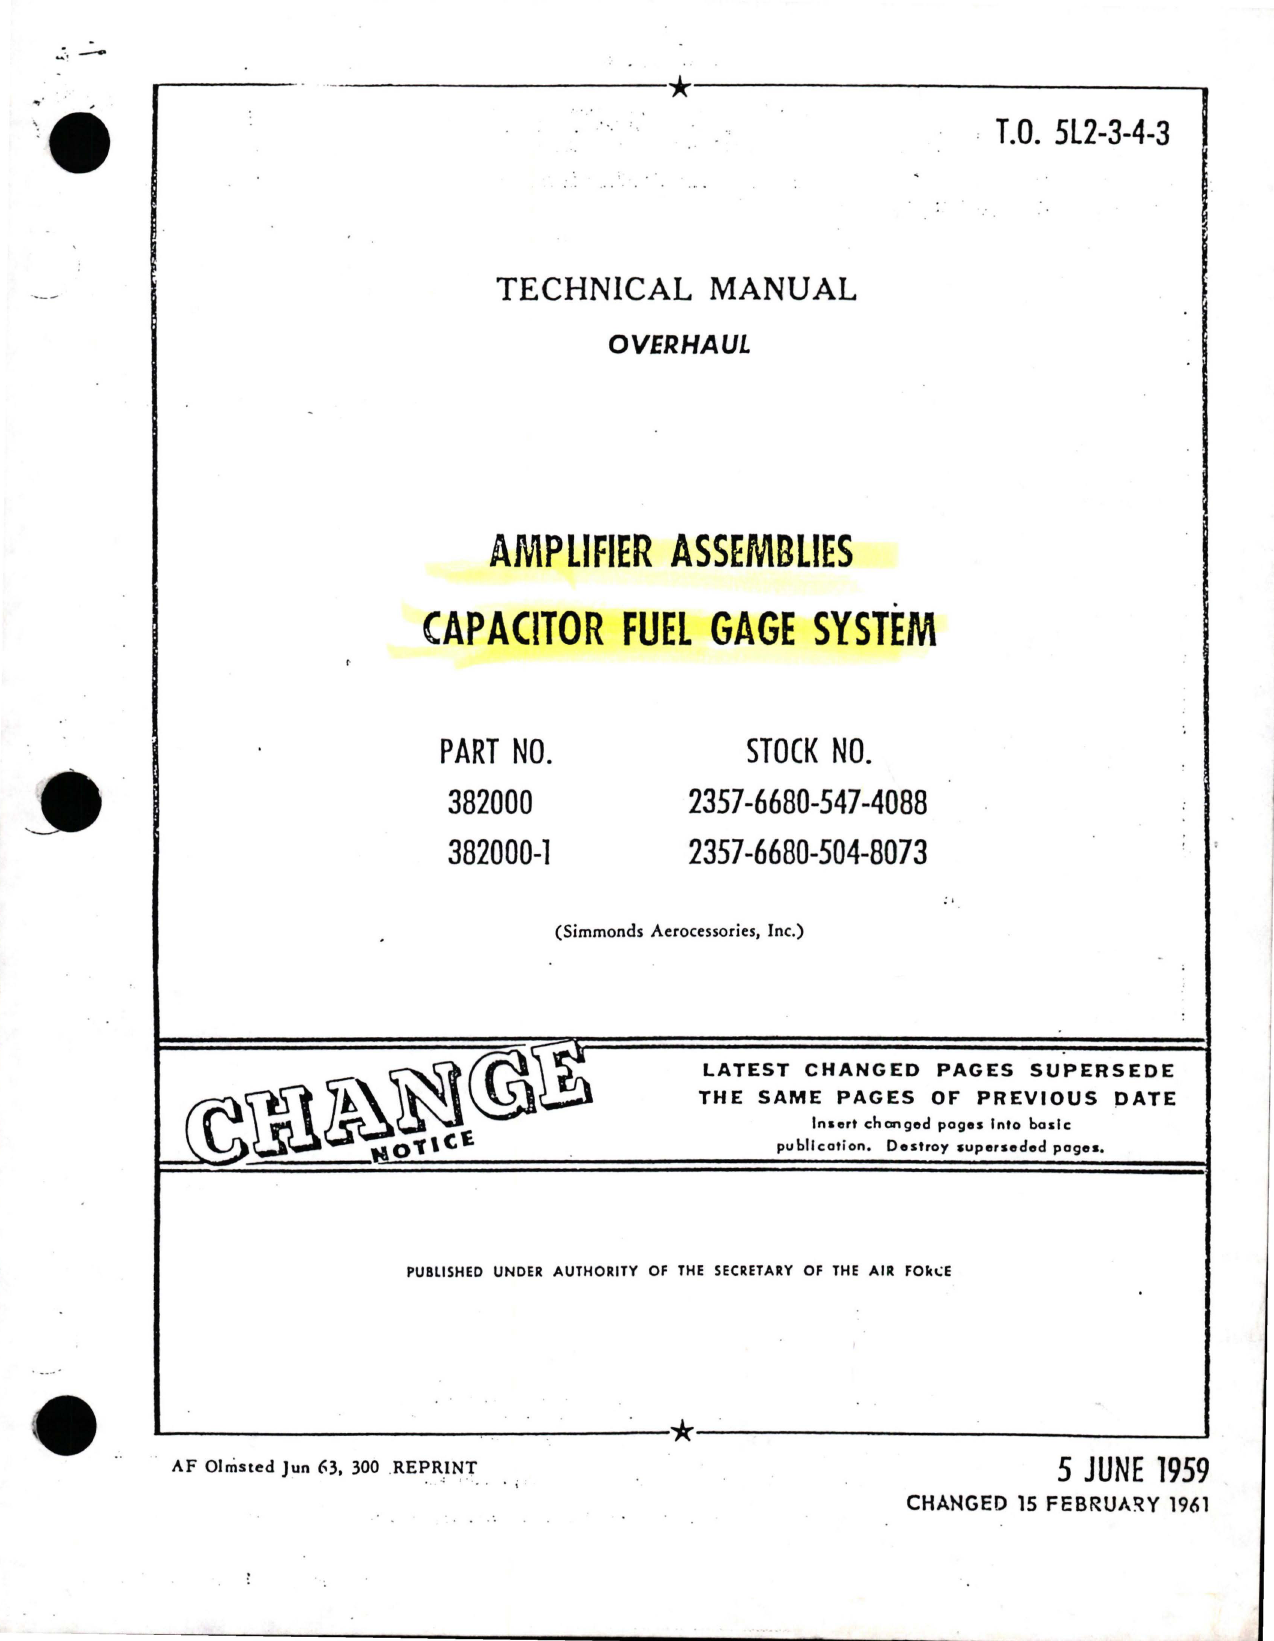 Sample page 1 from AirCorps Library document: Overhaul for Capacitor Fuel Gage System Amplifier Assemblies - Parts 382000 and 382000-1